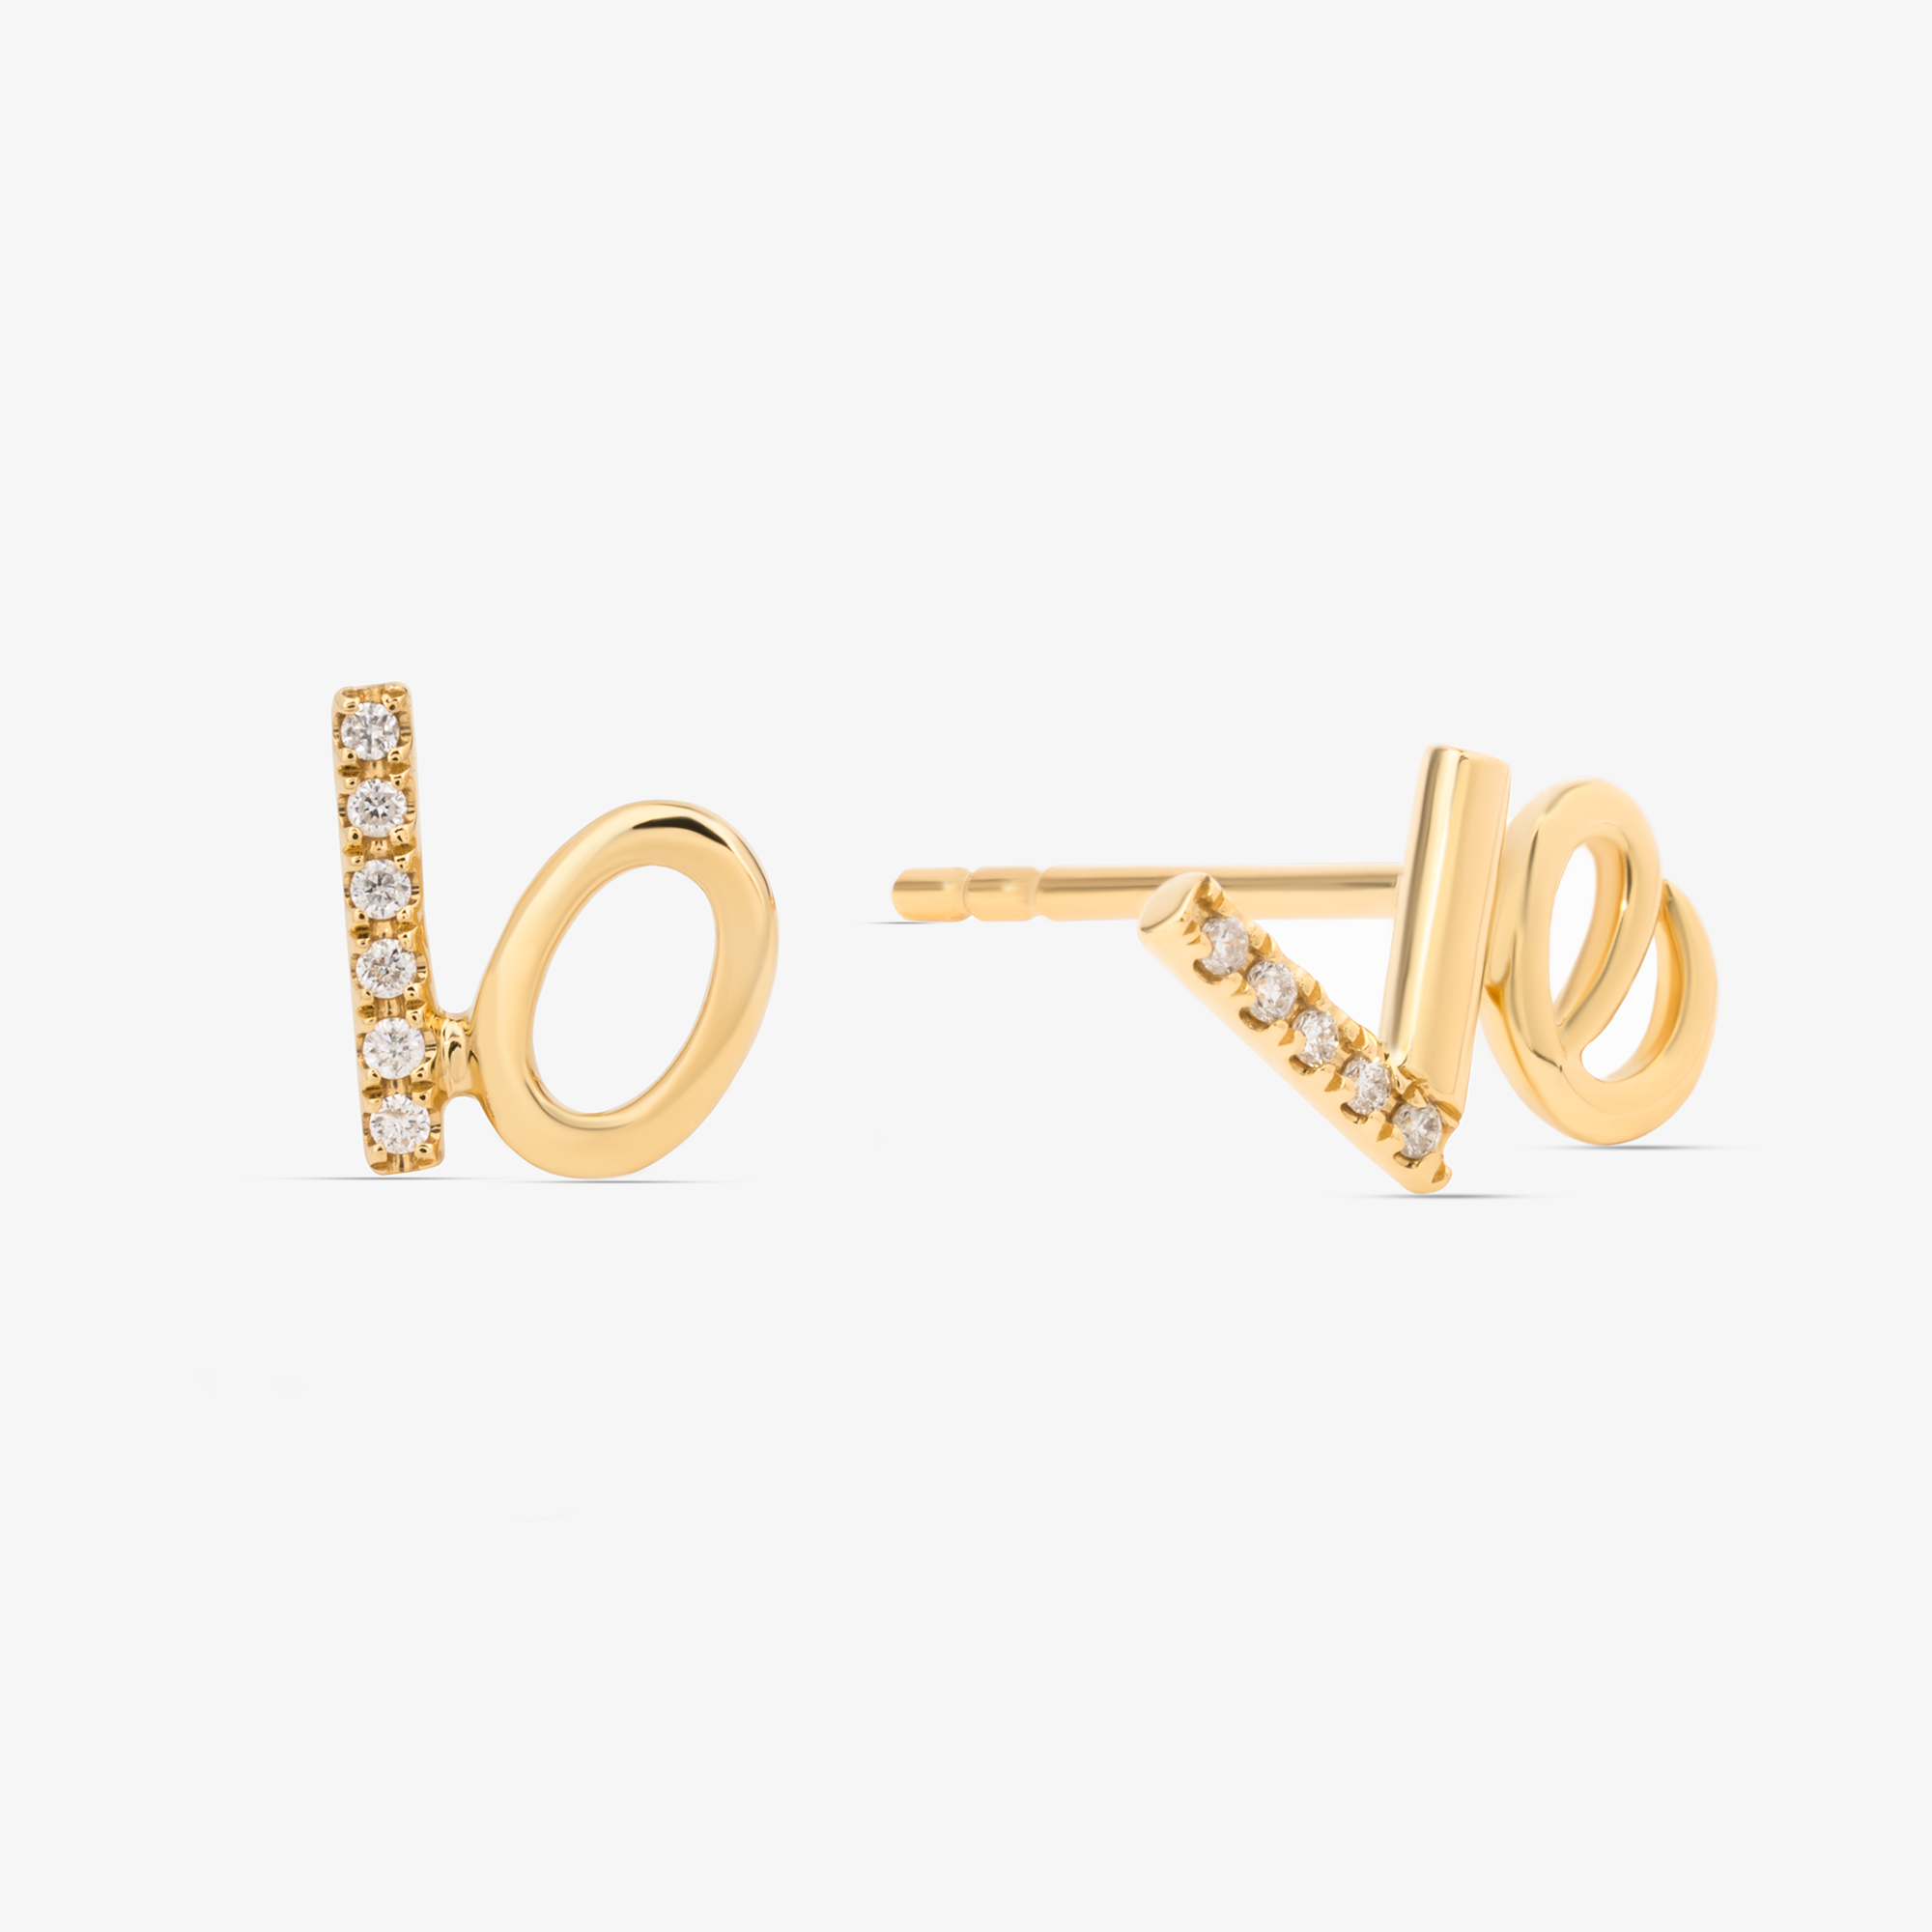 Love Earrings In 18K Solid Yellow Gold With Diamonds